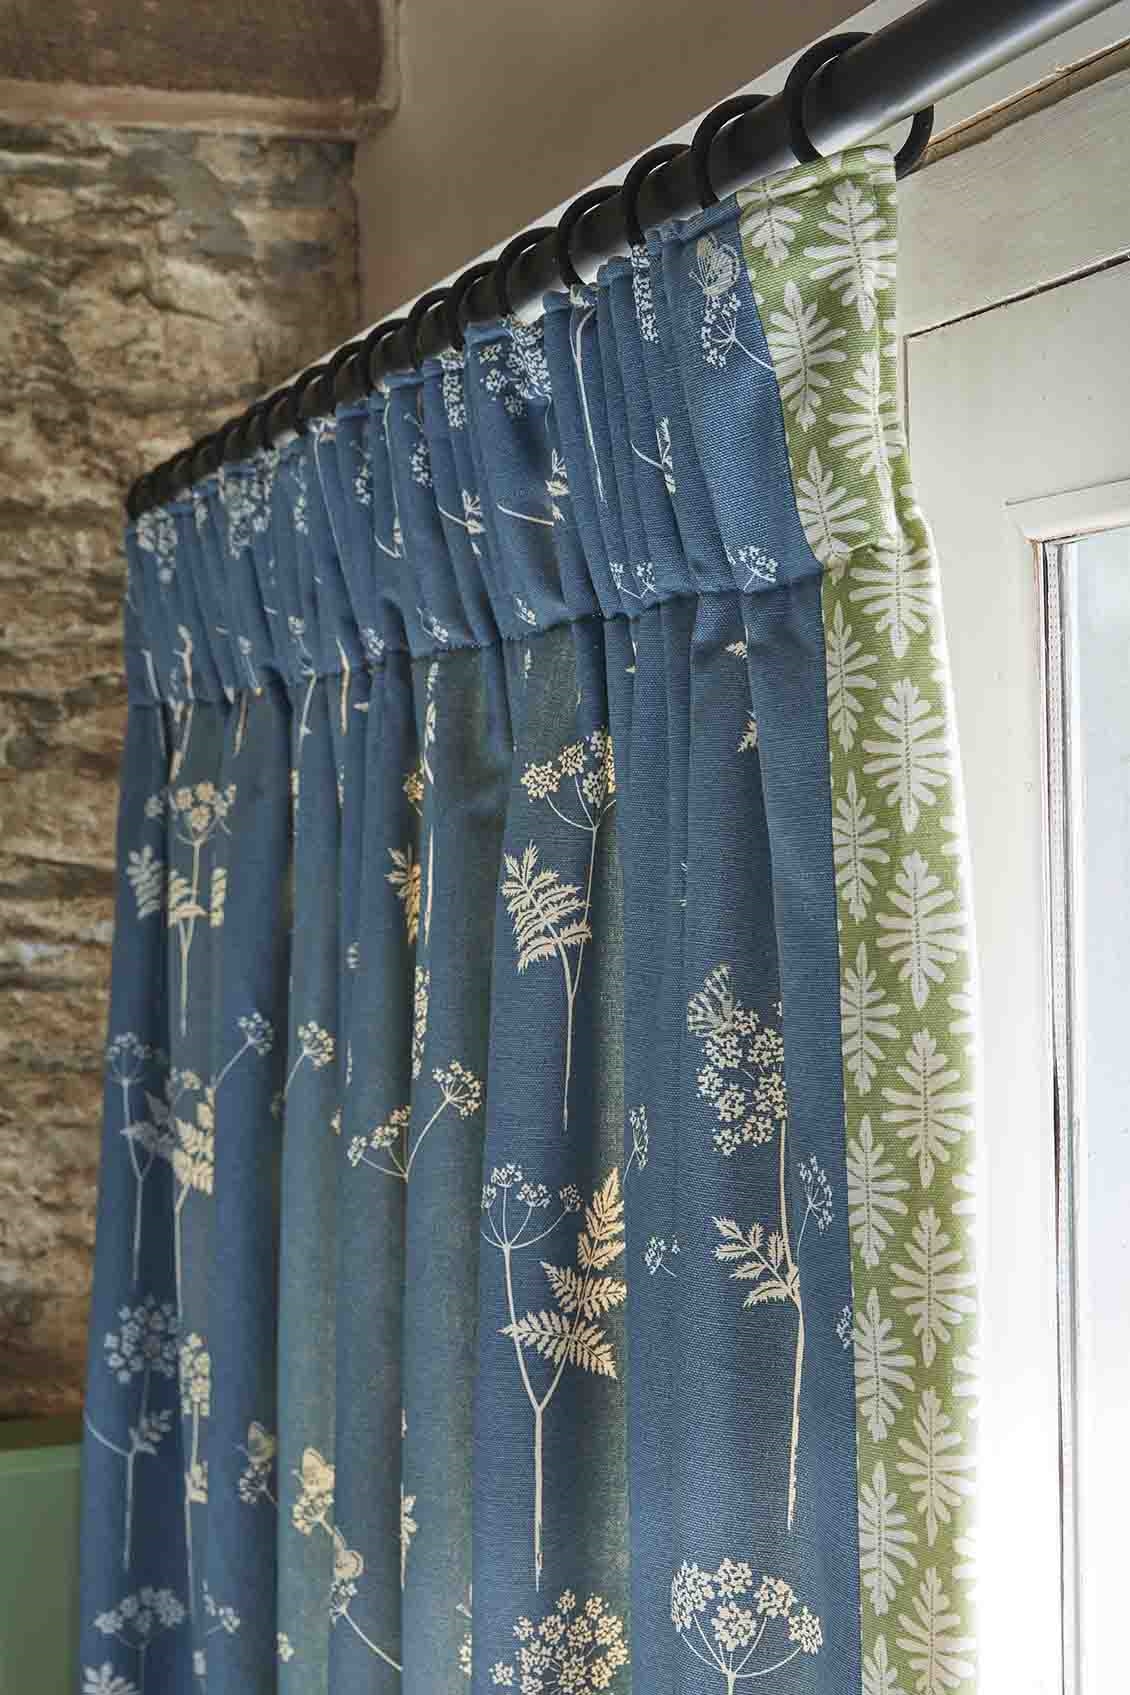 double sided curtains